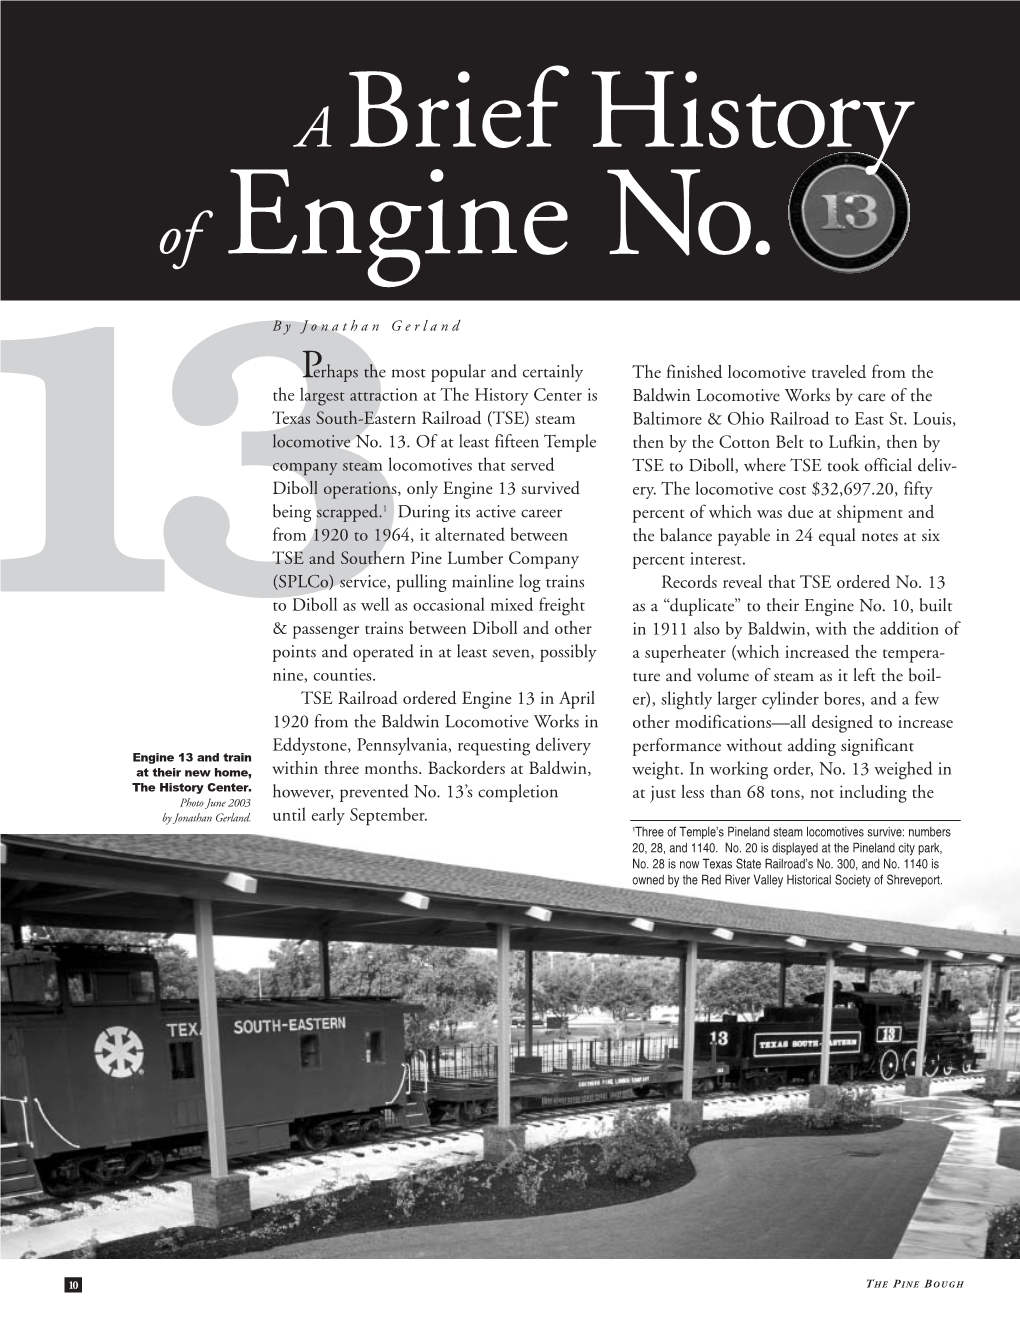 Download This Pine Bough Issue for History and Photos of Engine